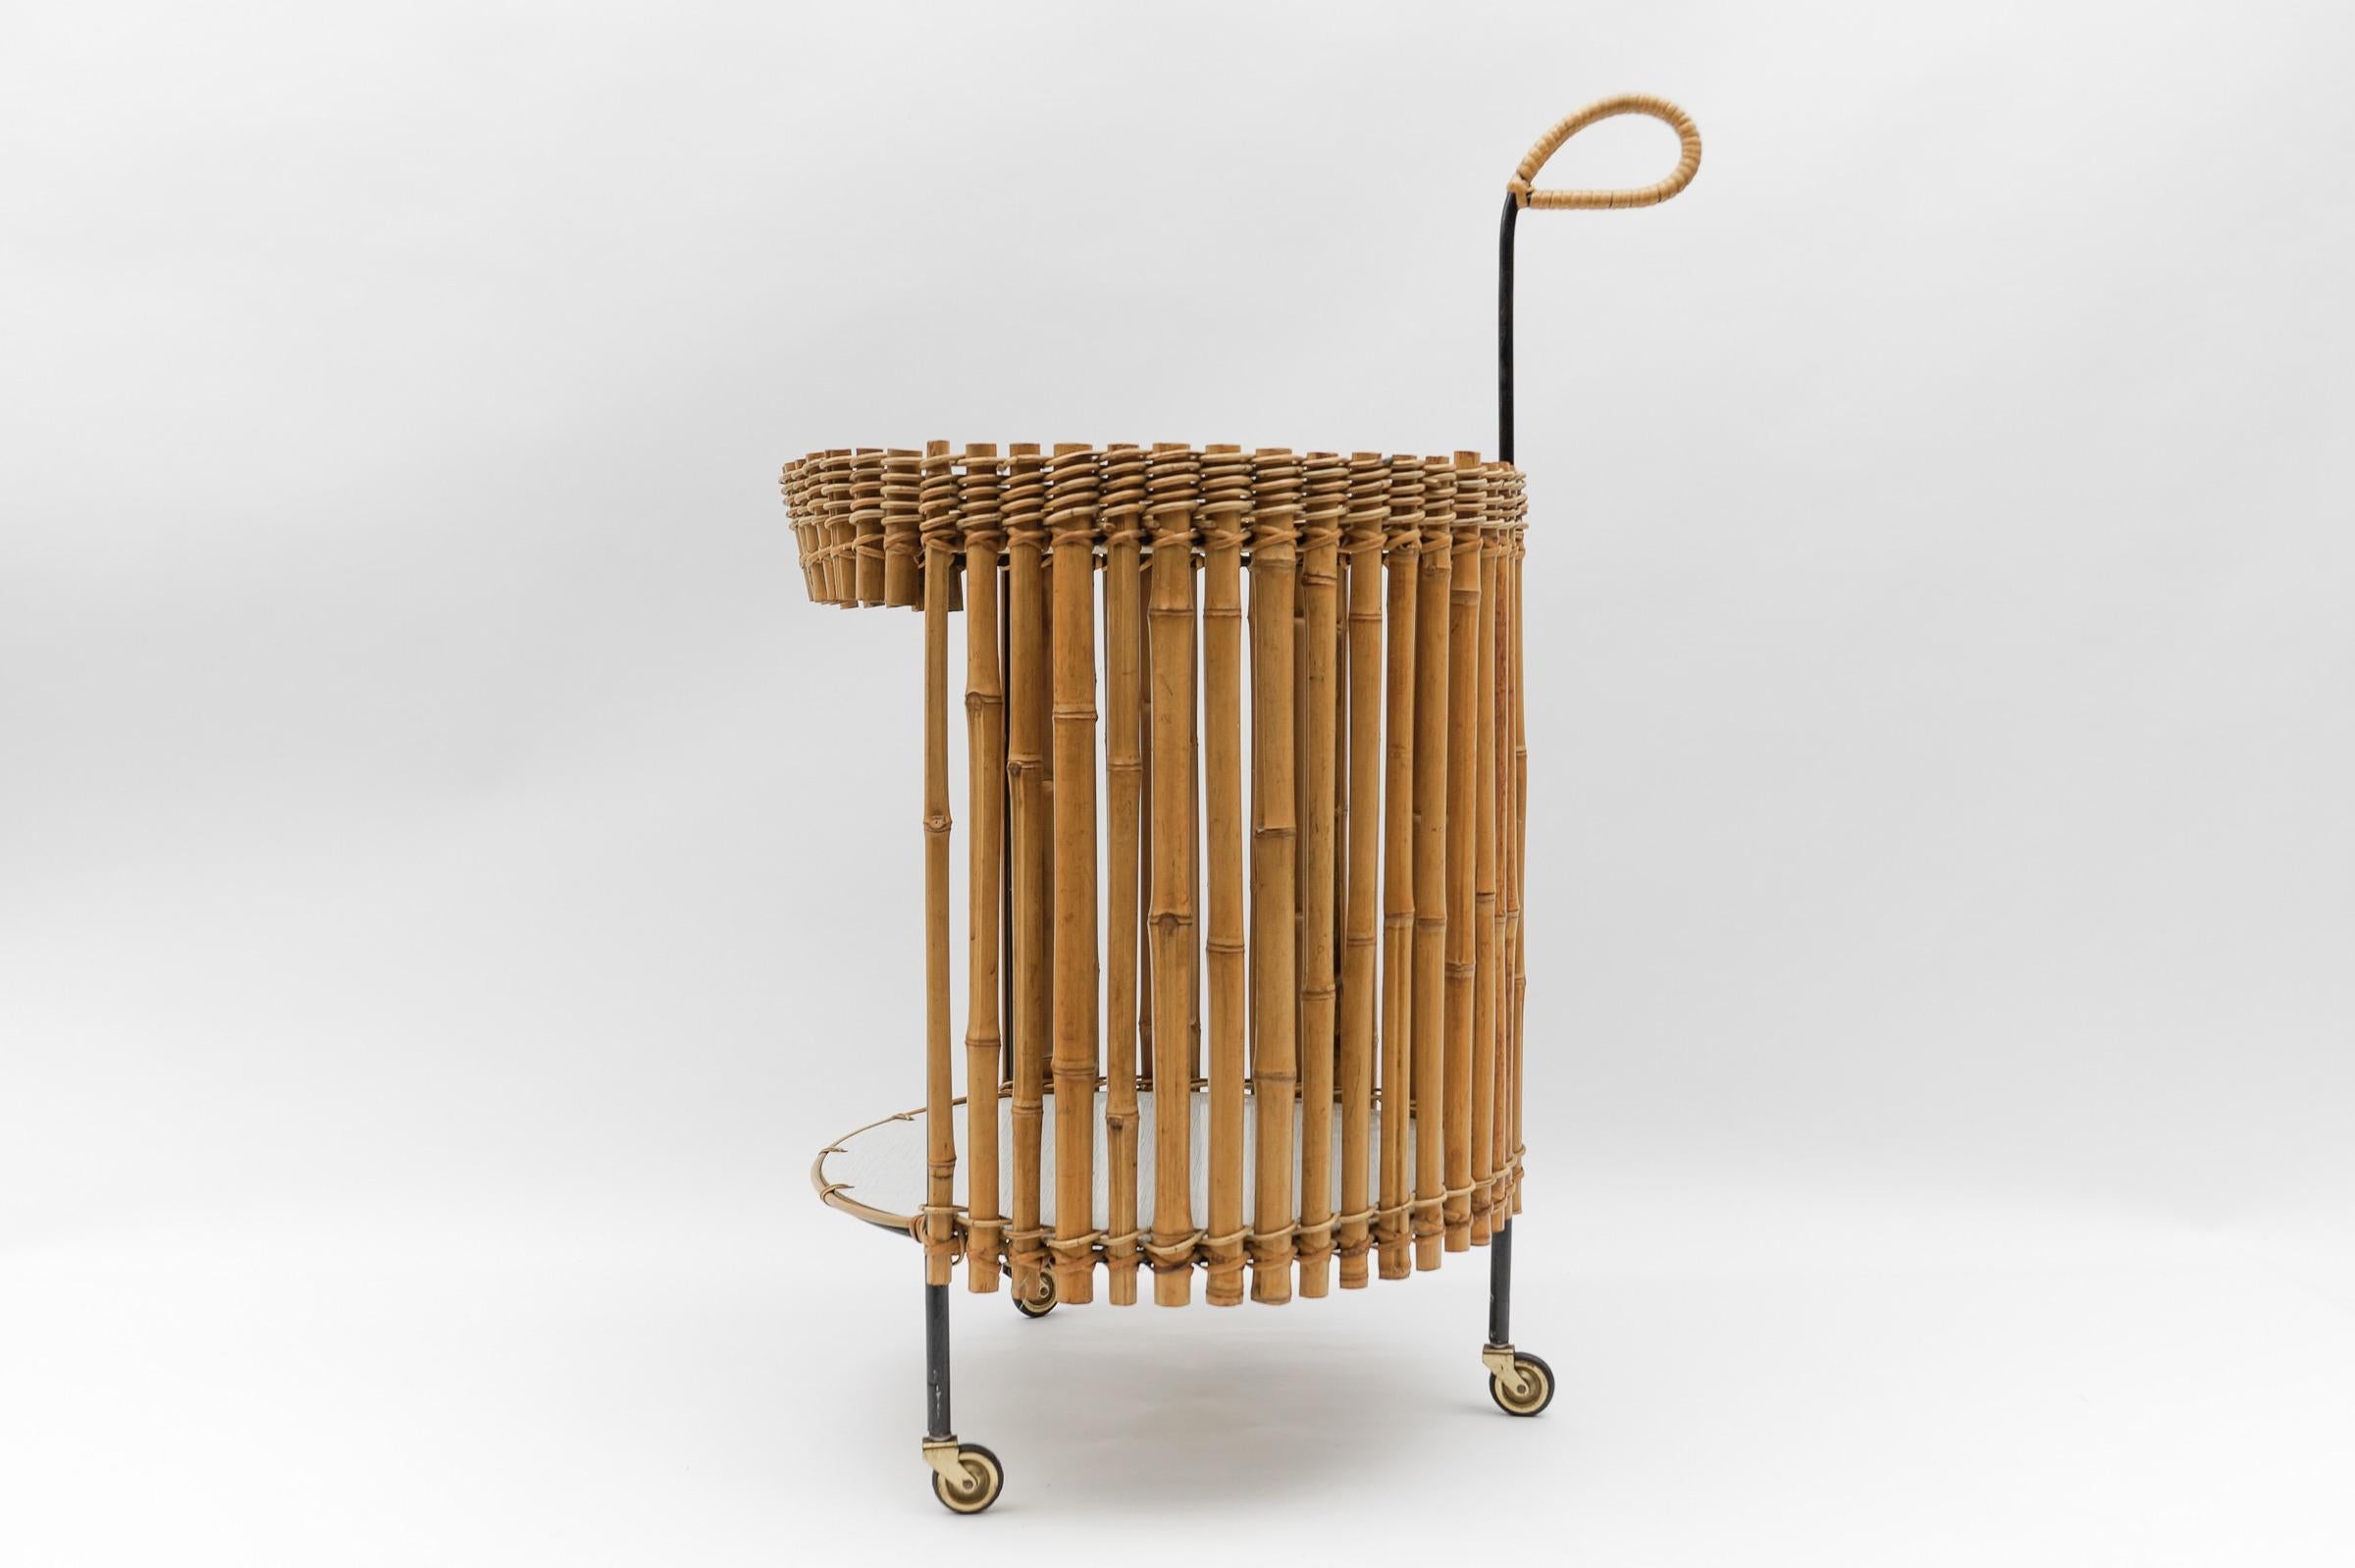 Austrian Stunning Mid-Century Modern Round Serving Cart in Bamboo and Metal, 1950s For Sale